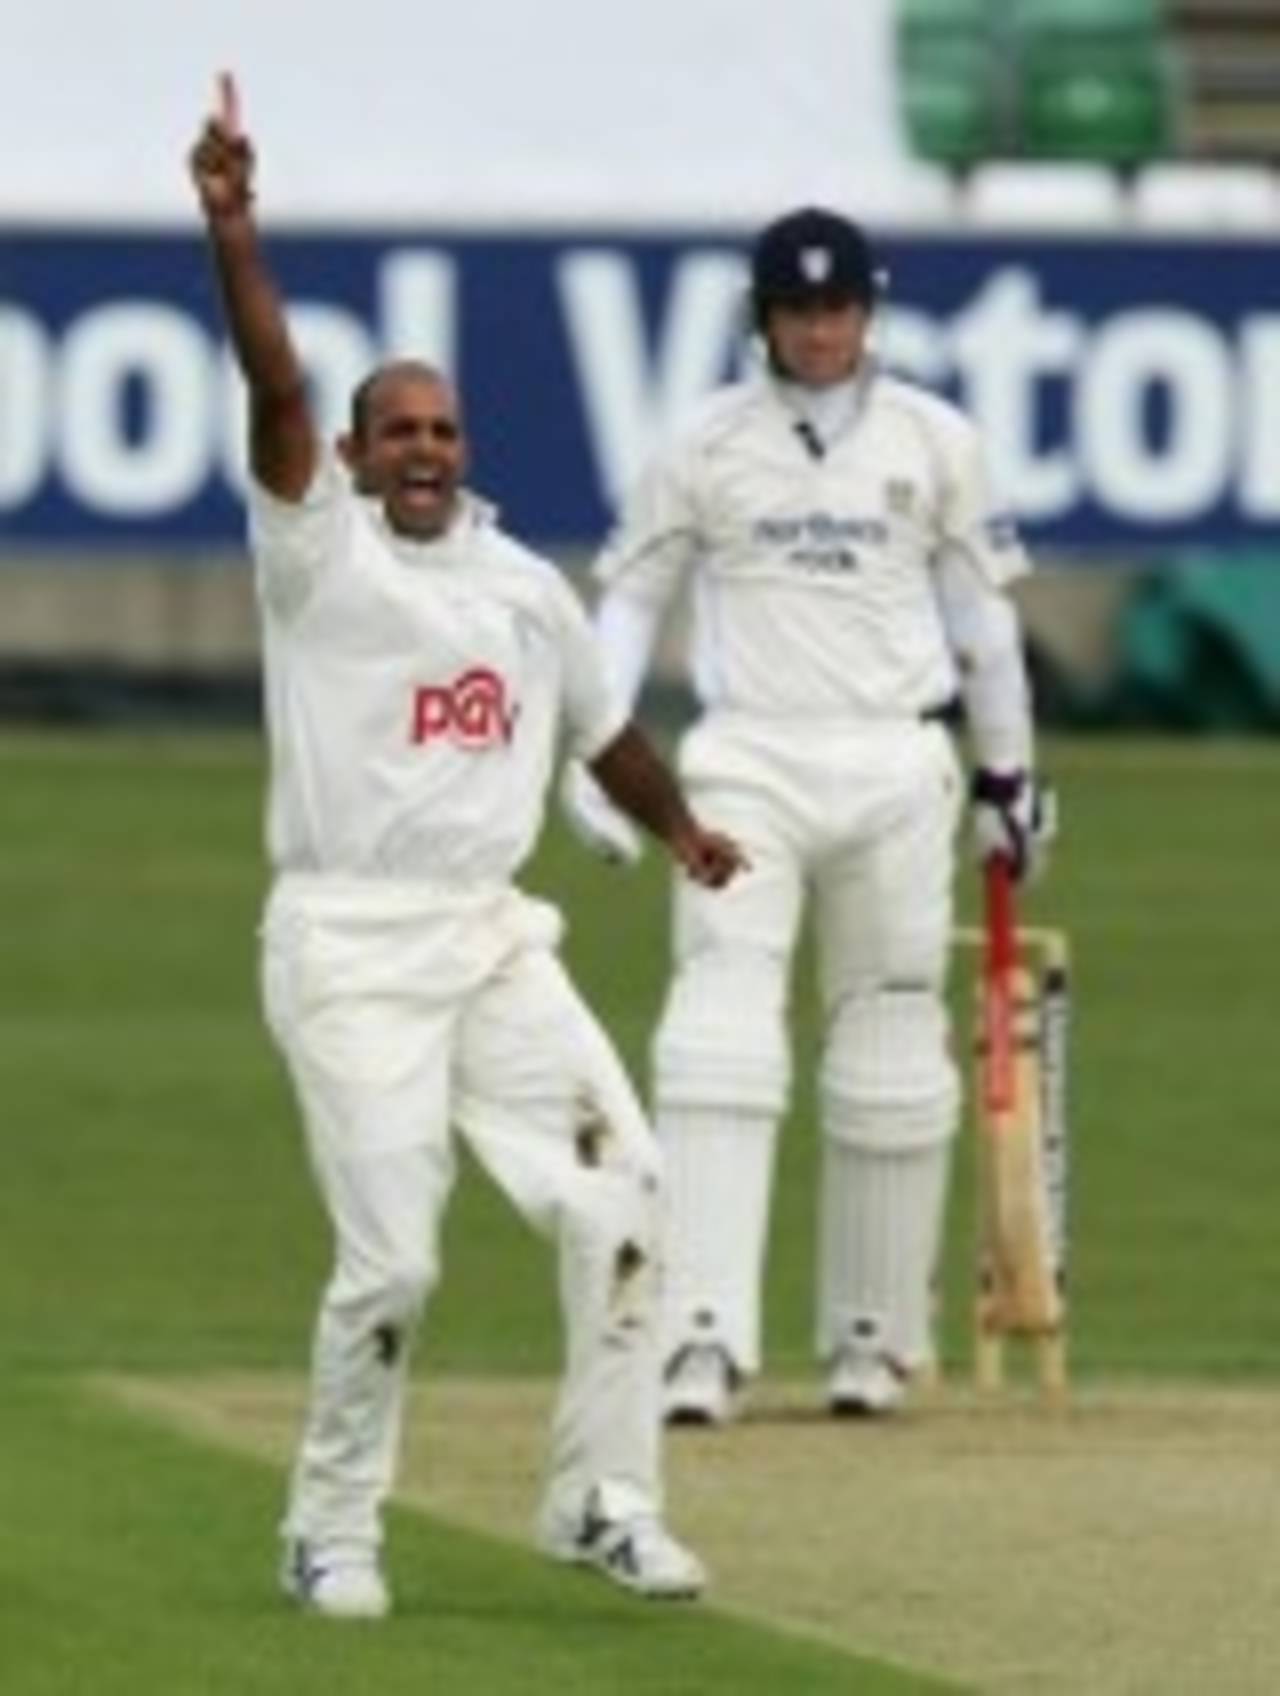 Rana Naved-ul-Hasan appeals successfully for Gordon Muchall's wicket, Durham v Sussex, Chester-le-Street, May 23, 2006